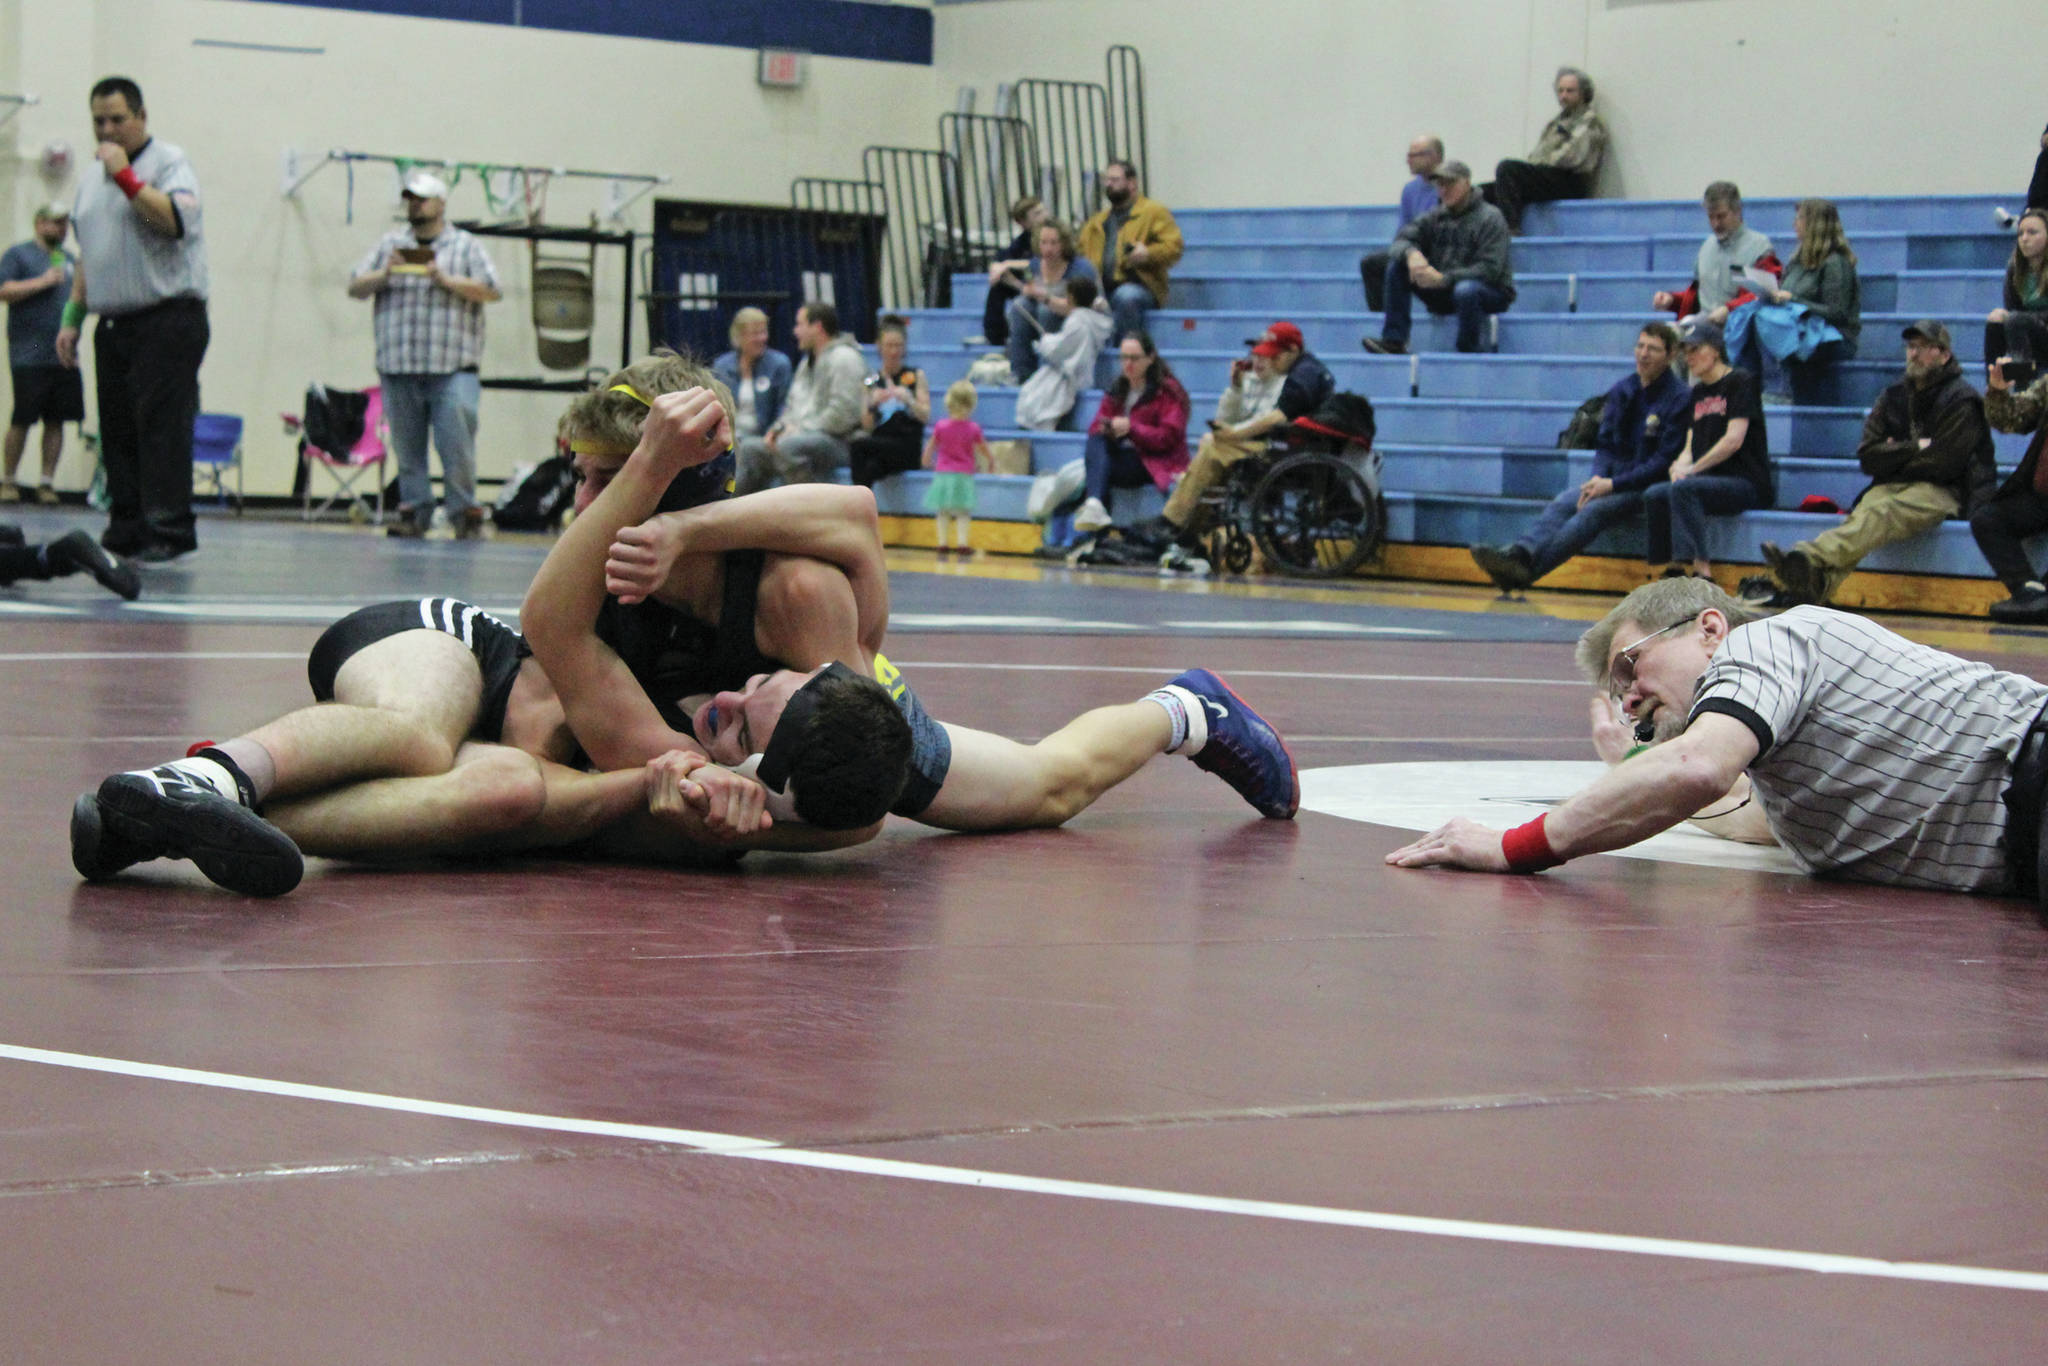 Homer’s Austin Cline attempts to pin Nikiski’s Joey Yourkowski during a dual meet between the two schools Friday, Nov. 22, 2019 at Soldotna High School in Soldotna, Alaska. (Photo by Cecilia Fitzpatrick)